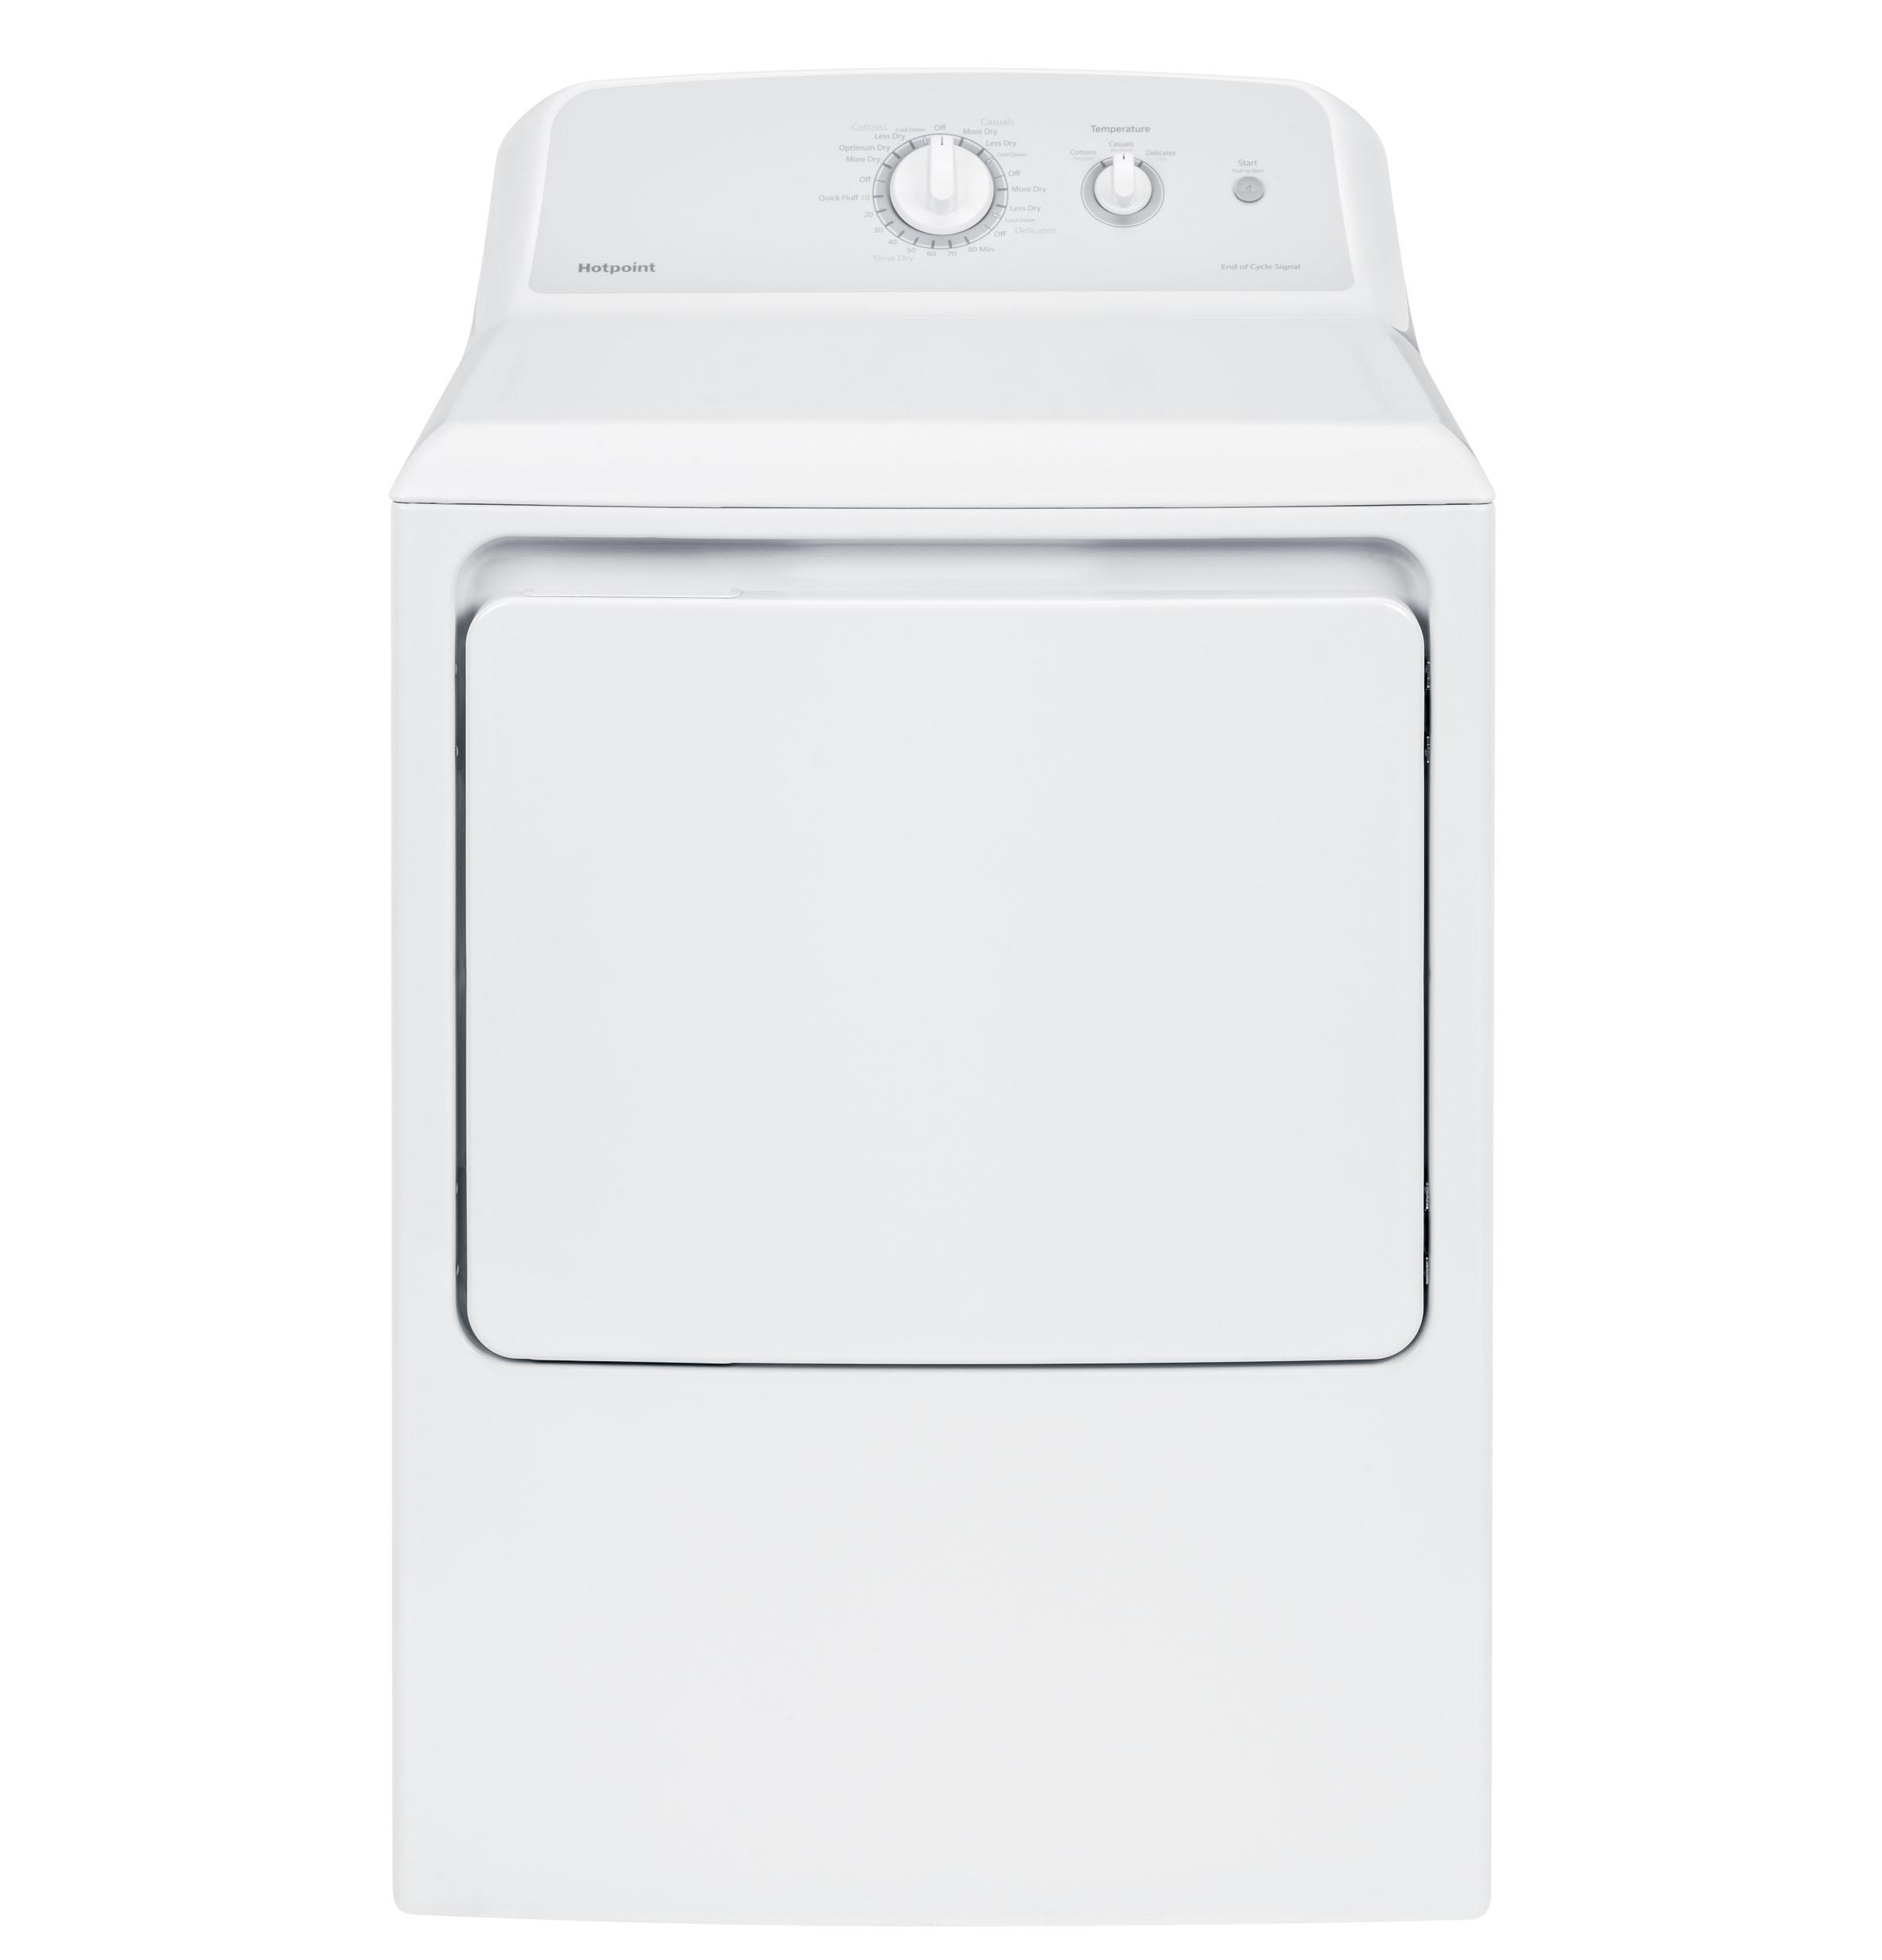 Climatic Home Products  Hot Point Gas Dryer, White - image 1 of 5